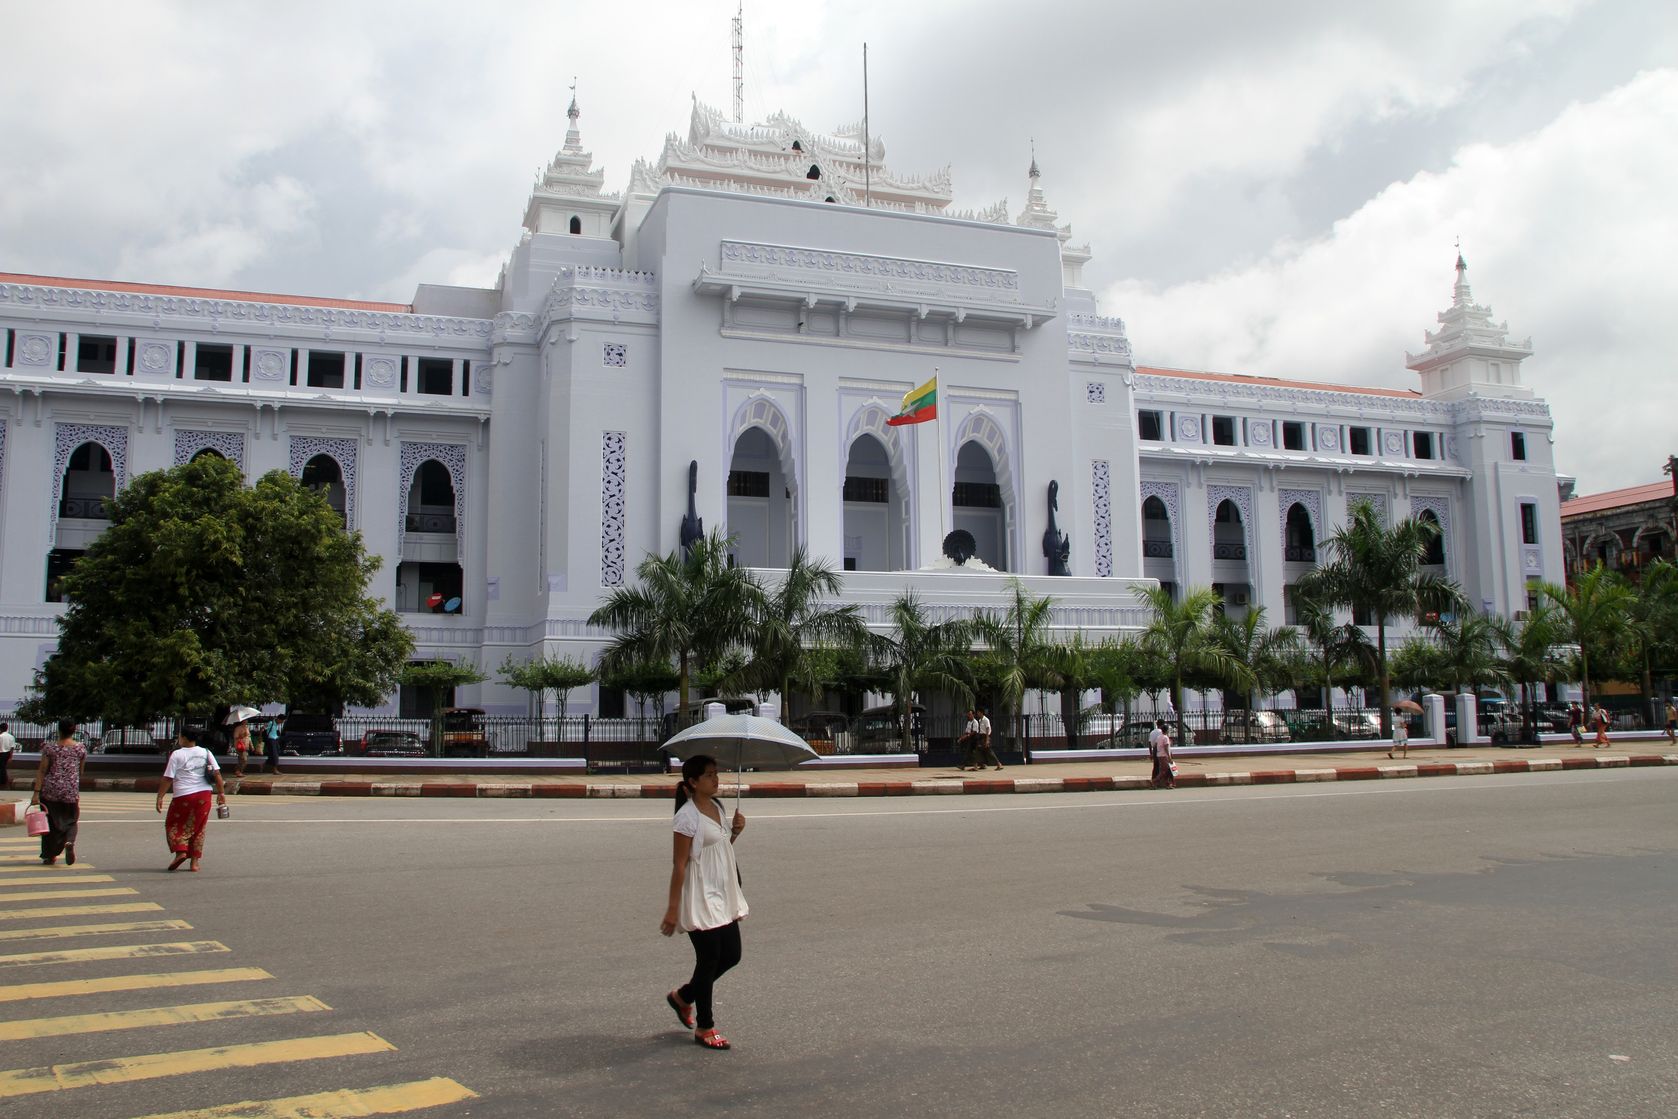 Amendments To The Anti-Corruption Law In Myanmar.